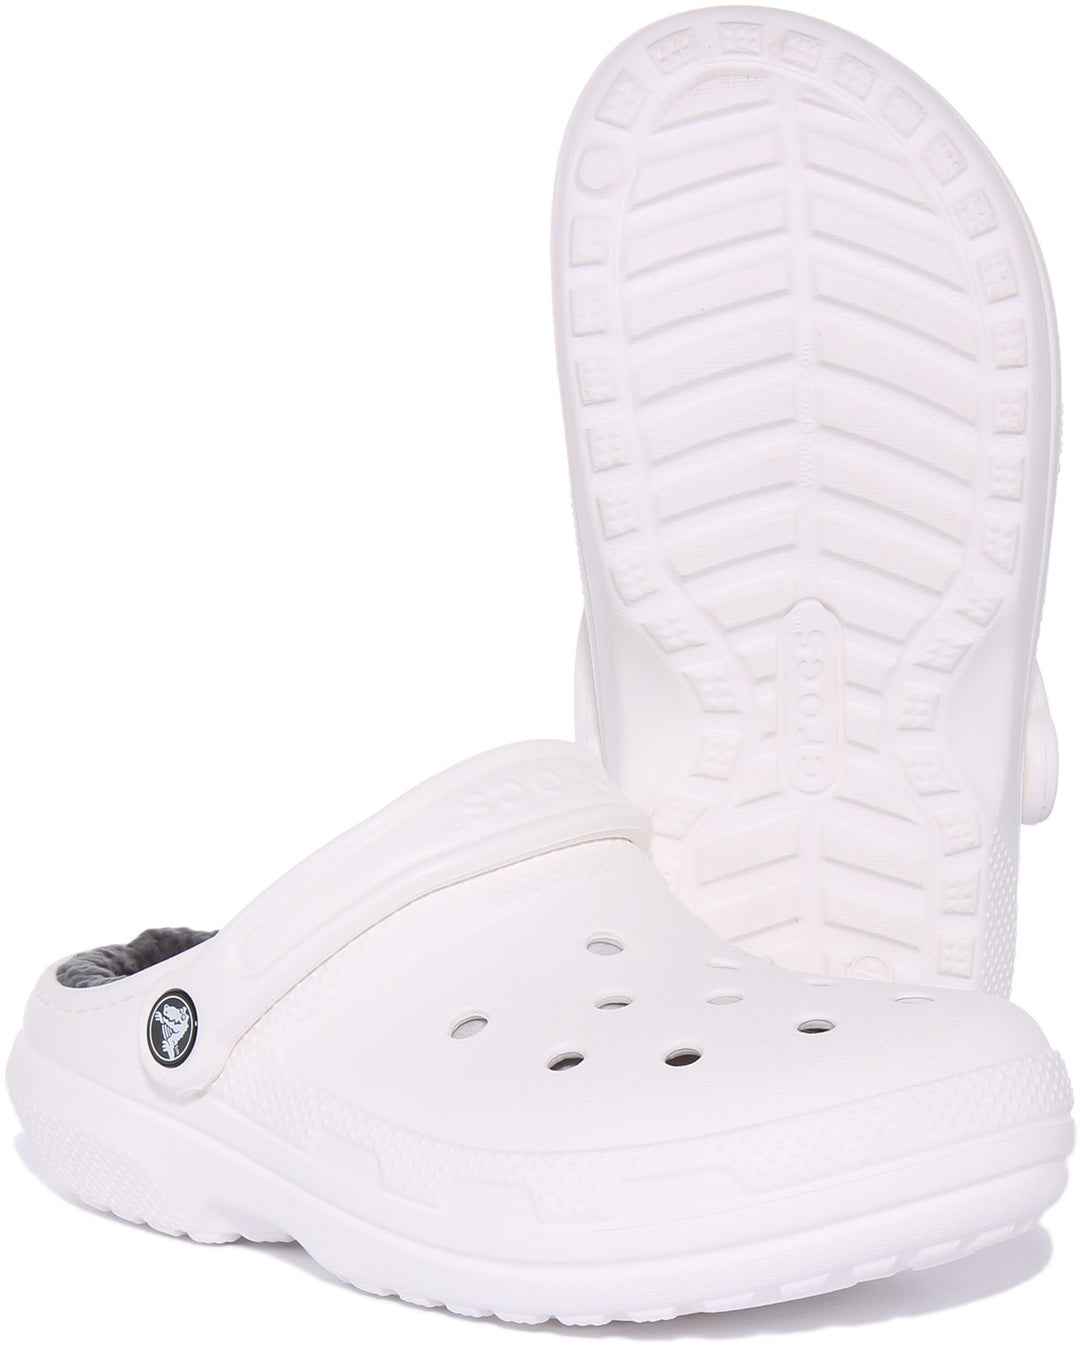 Crocs C Lined Clog In White